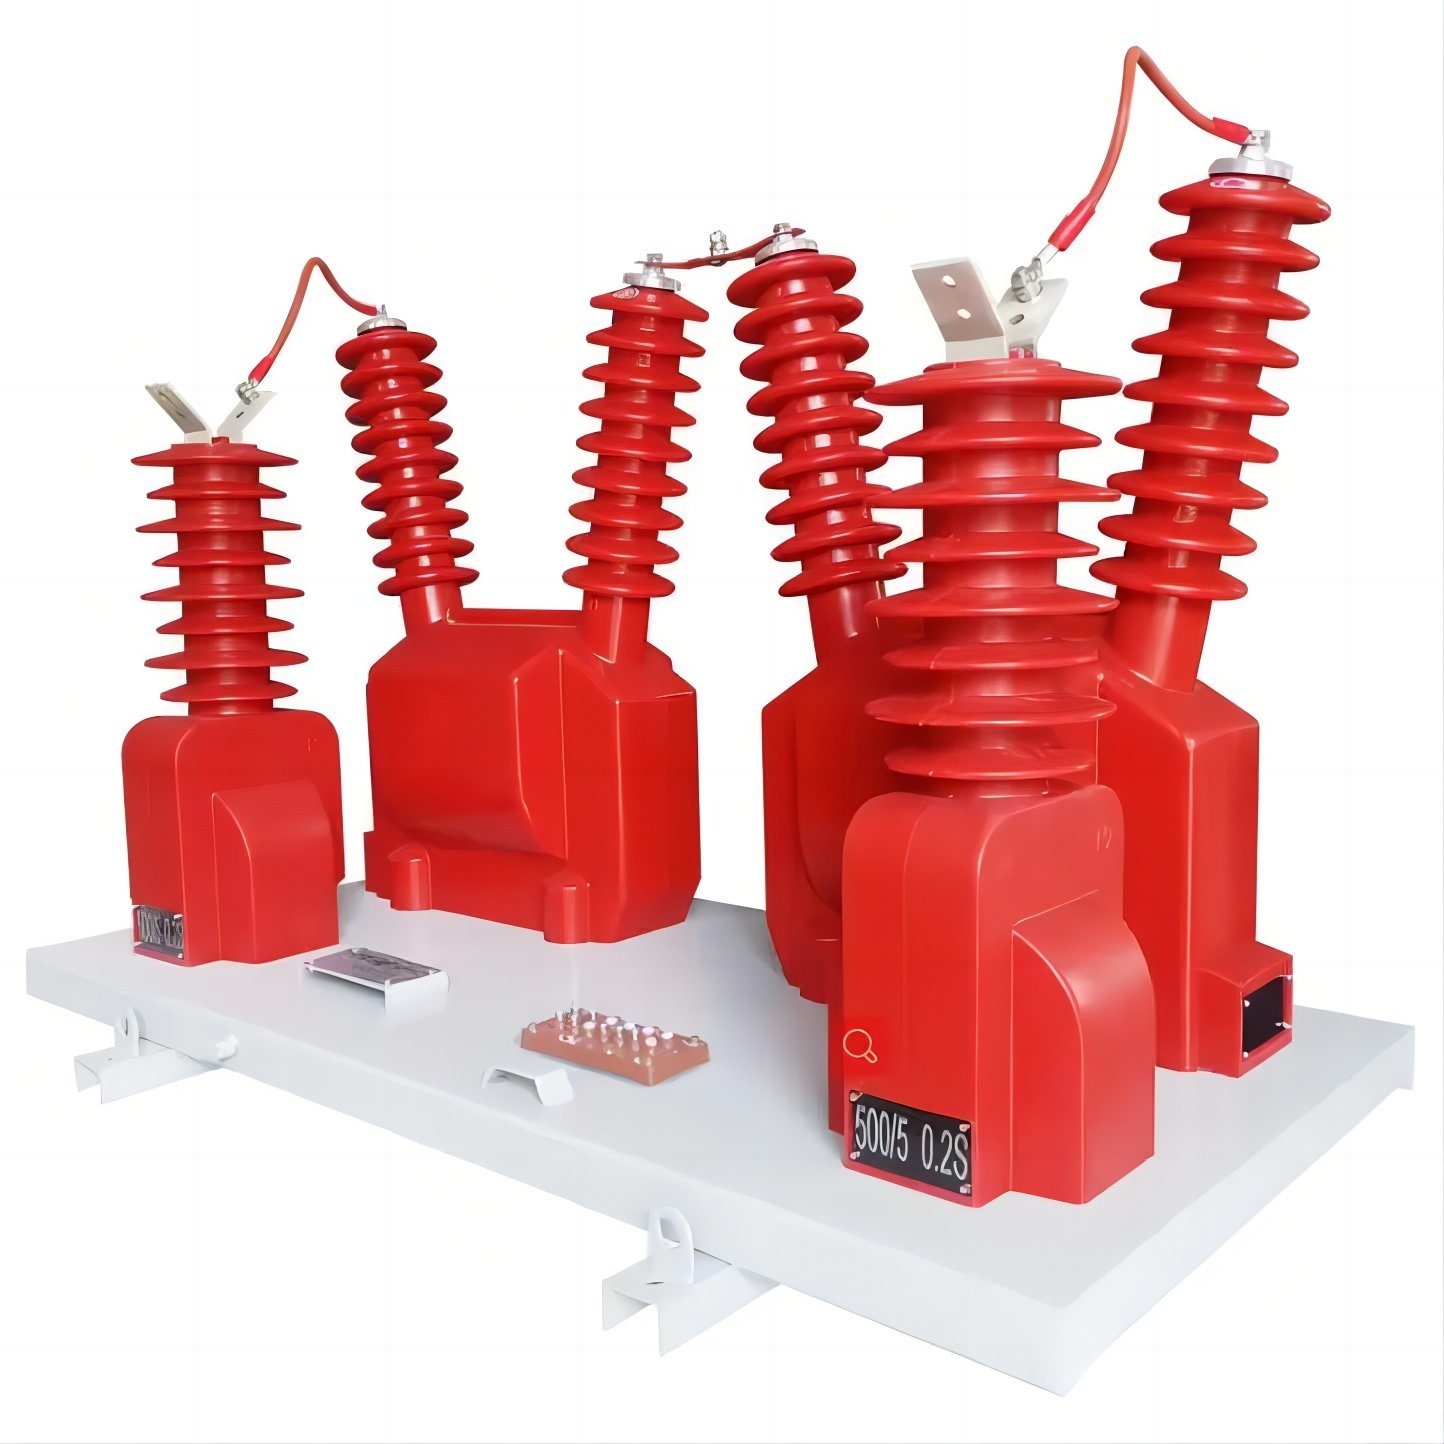 Jlszv-35 Series Three-Phase Outdoor Dry-Type High-Voltage Combined Transformer